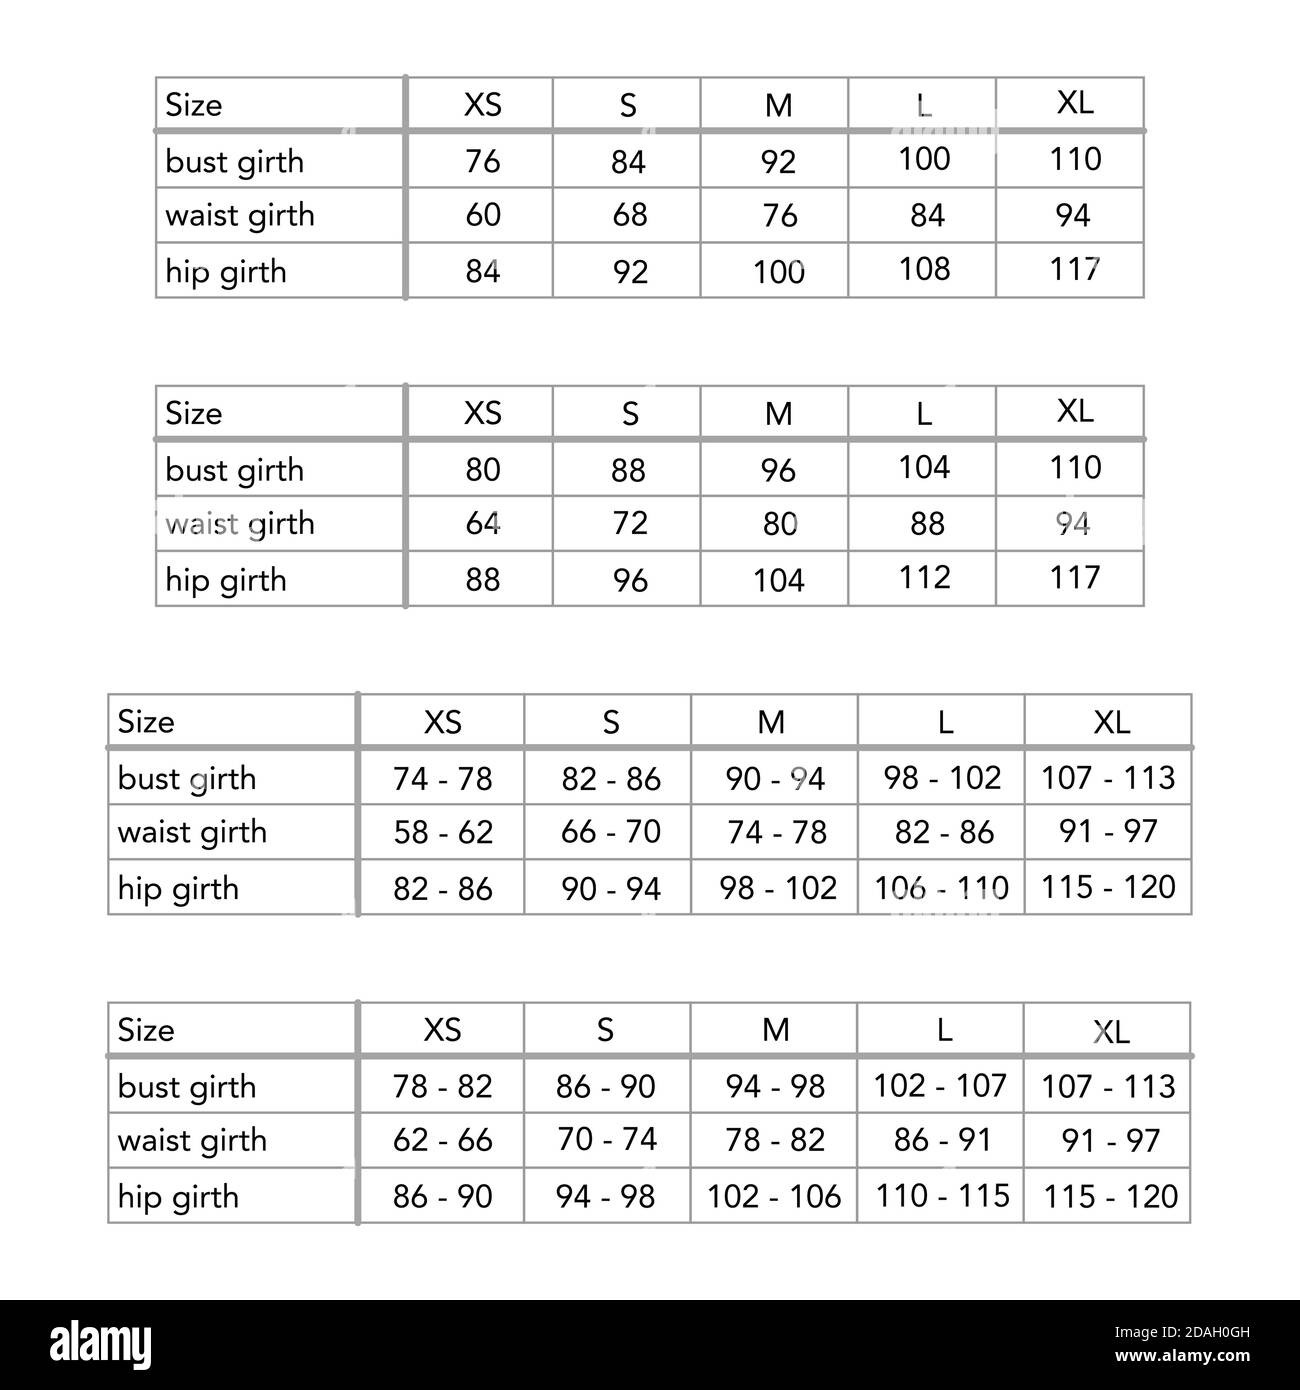 Women new European system clothing standard body measurements for different brands, style fashion lady chart for site, production and online clothes shop. XS, S, L, XL, bust, waist, hip girth